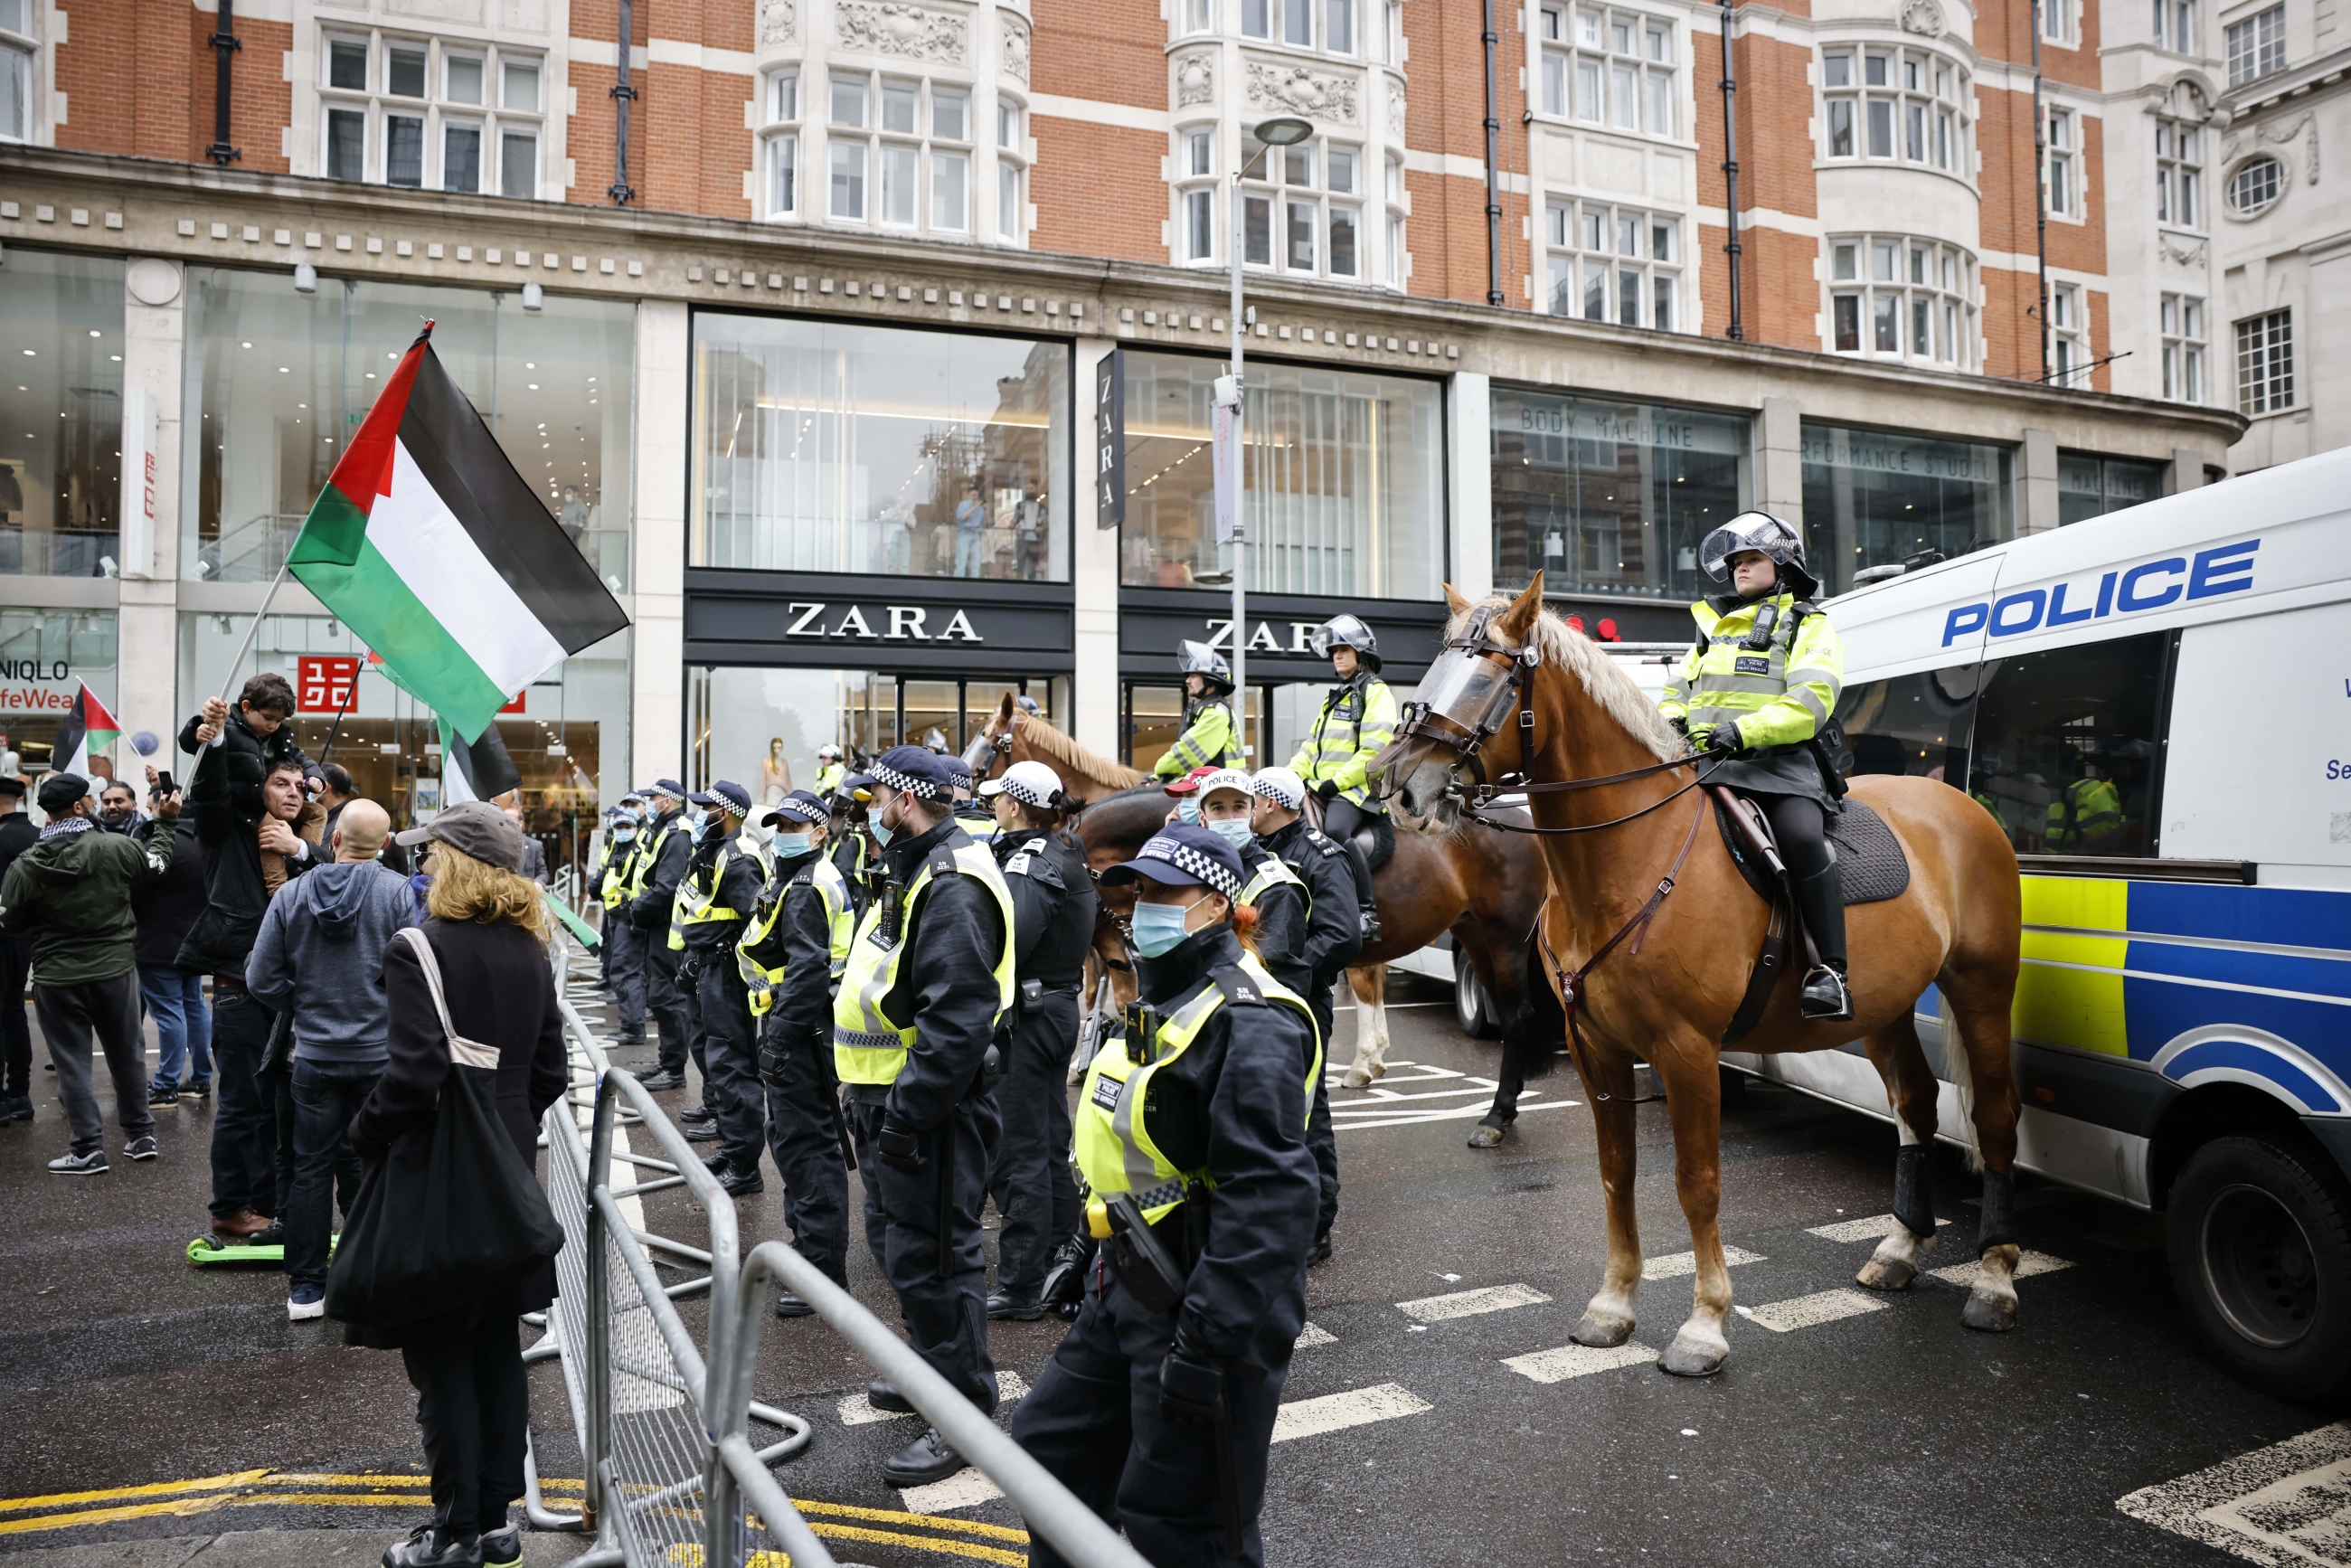 Protester with a Palestinian flag at a police cordon during a protest in central London on 23 May 2021 (AFP/File photo)